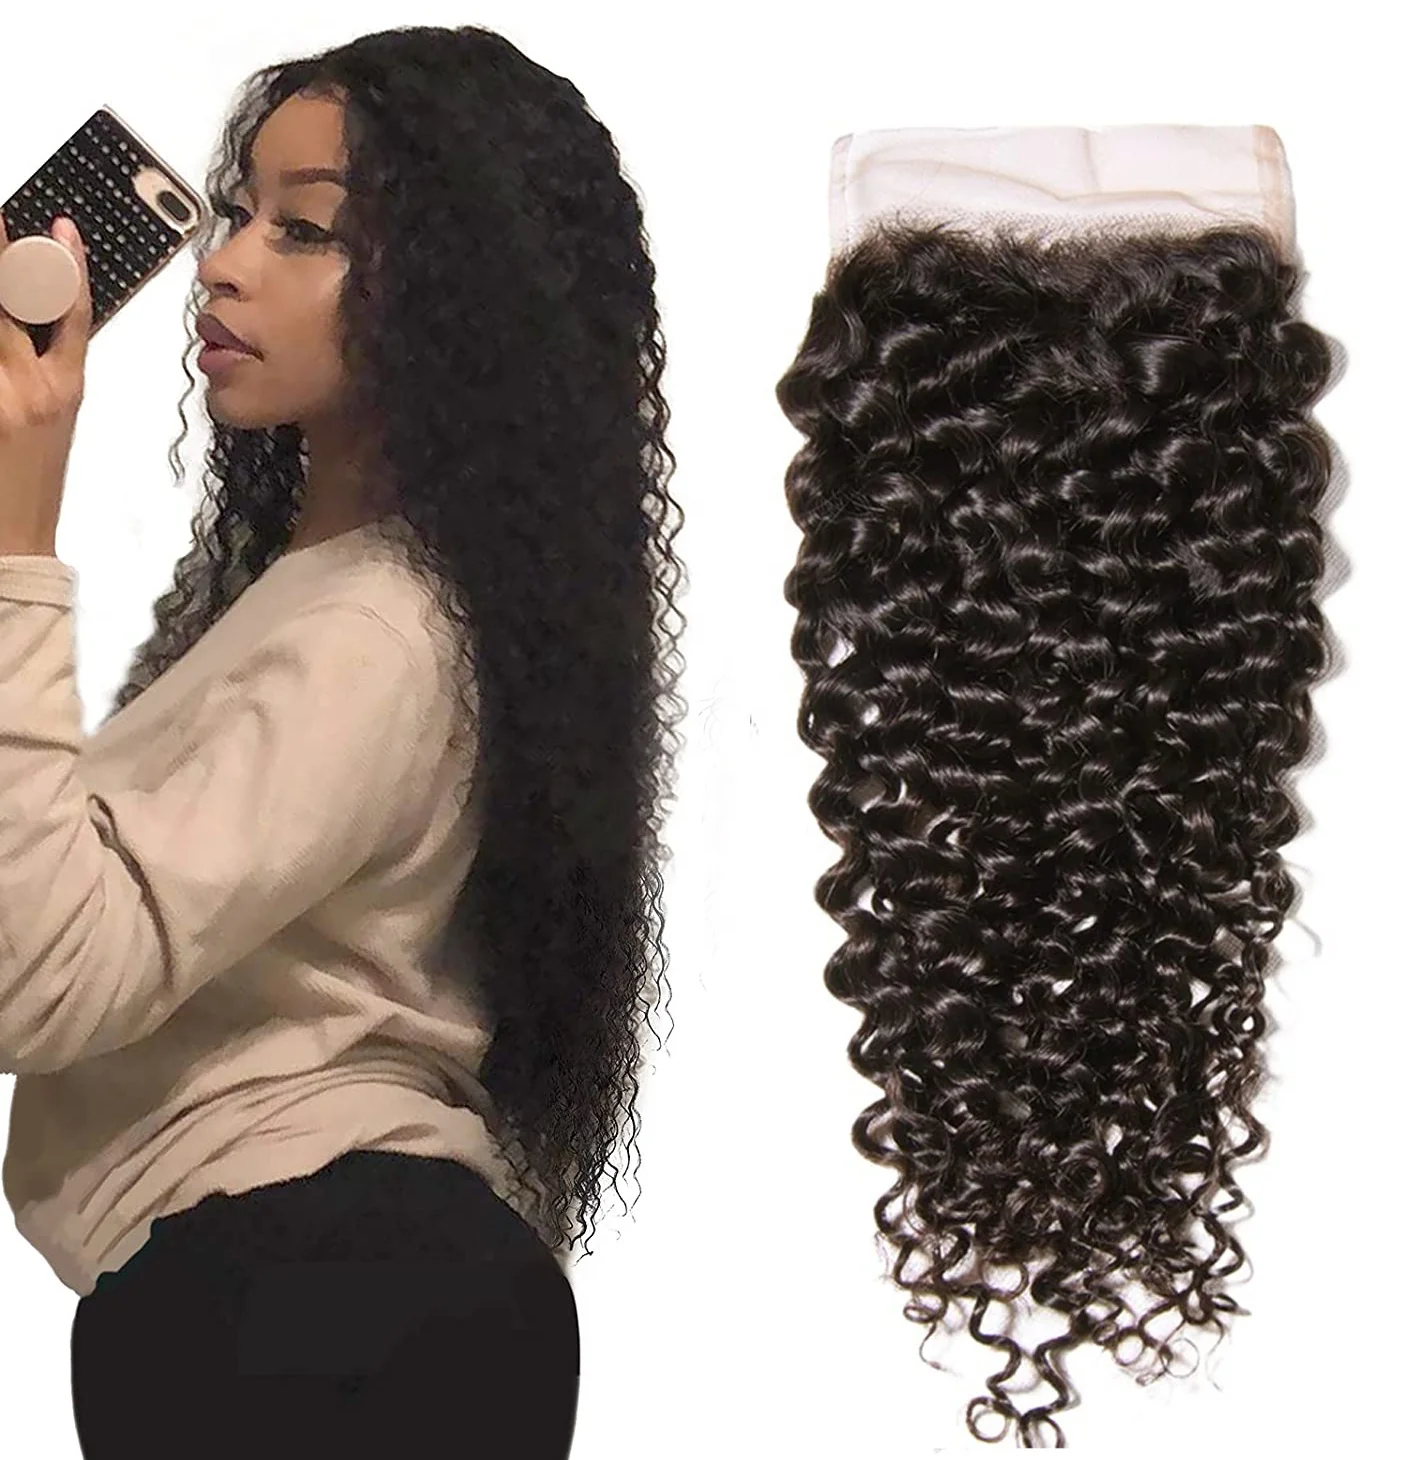 

High Quality Brazilian 10a Grade Virgin Unprocessed Human Hair Closure 4x4 Hd Lace Closure Free Part Jerry Curly Wave Human Hair